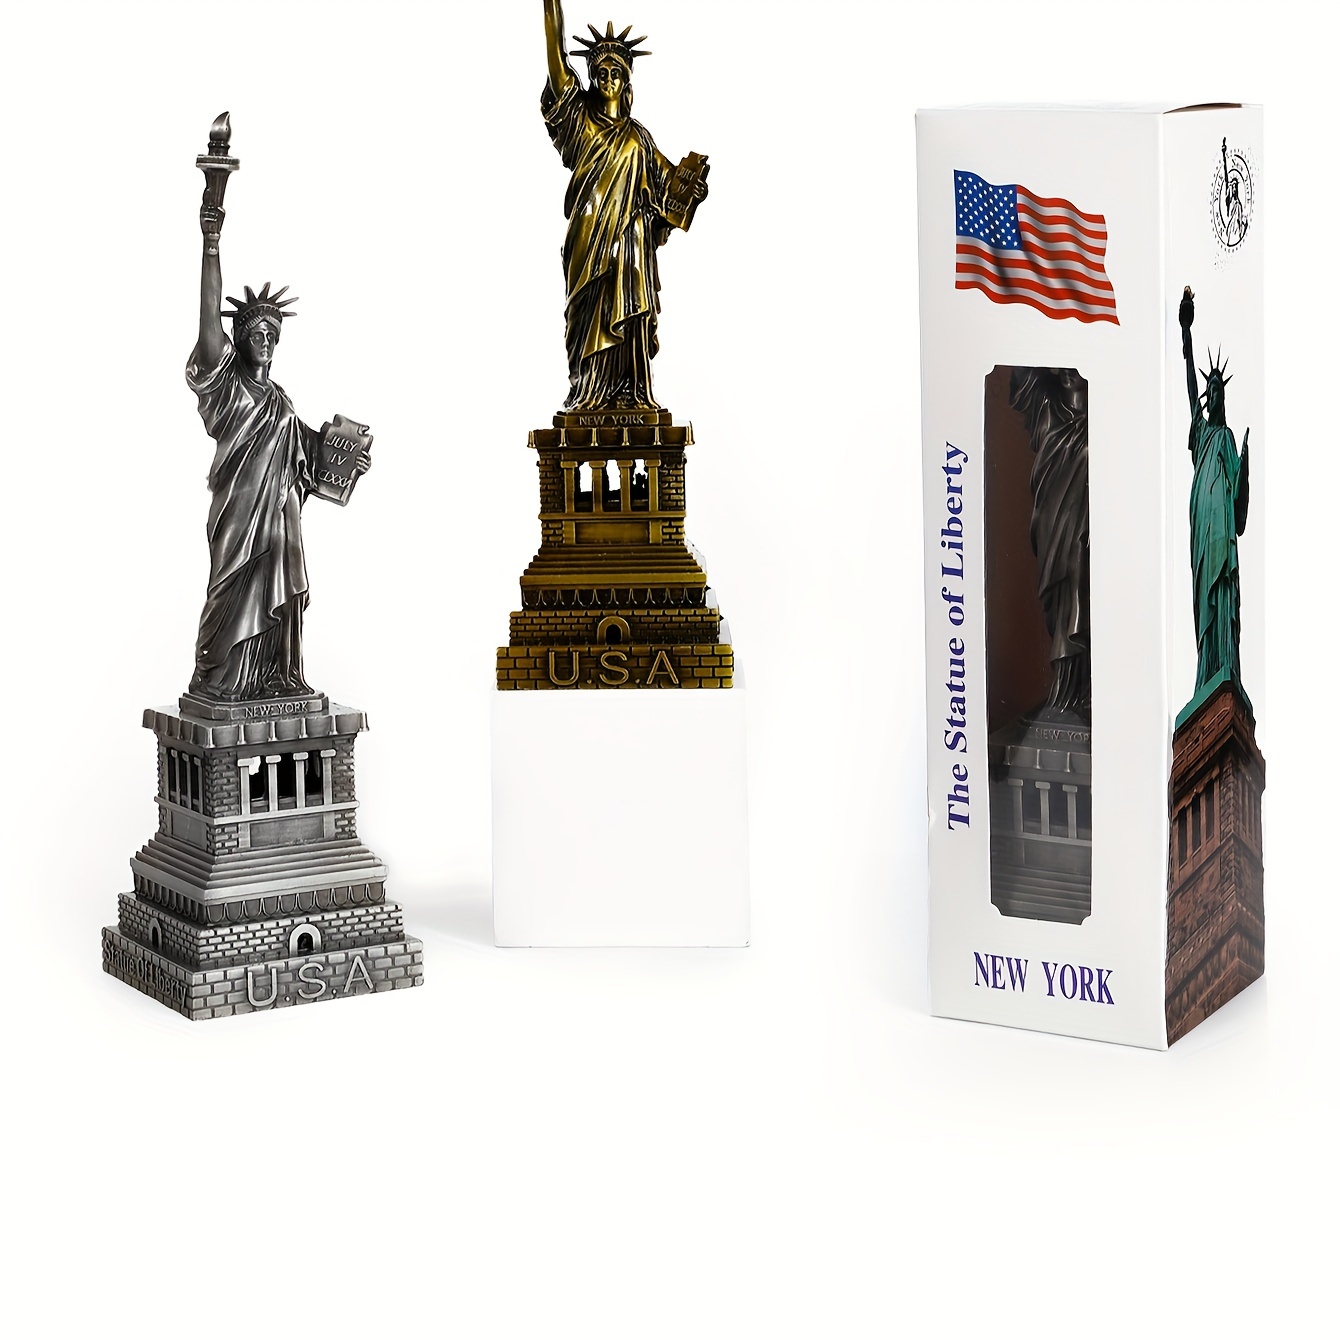 [Unique] 1pc Statue Of Liberty Ornament, Metal Crafts American Living Room Decoration, Desktop Ornaments Teacher Holiday Gift, For Home Room Living Room Office Decor